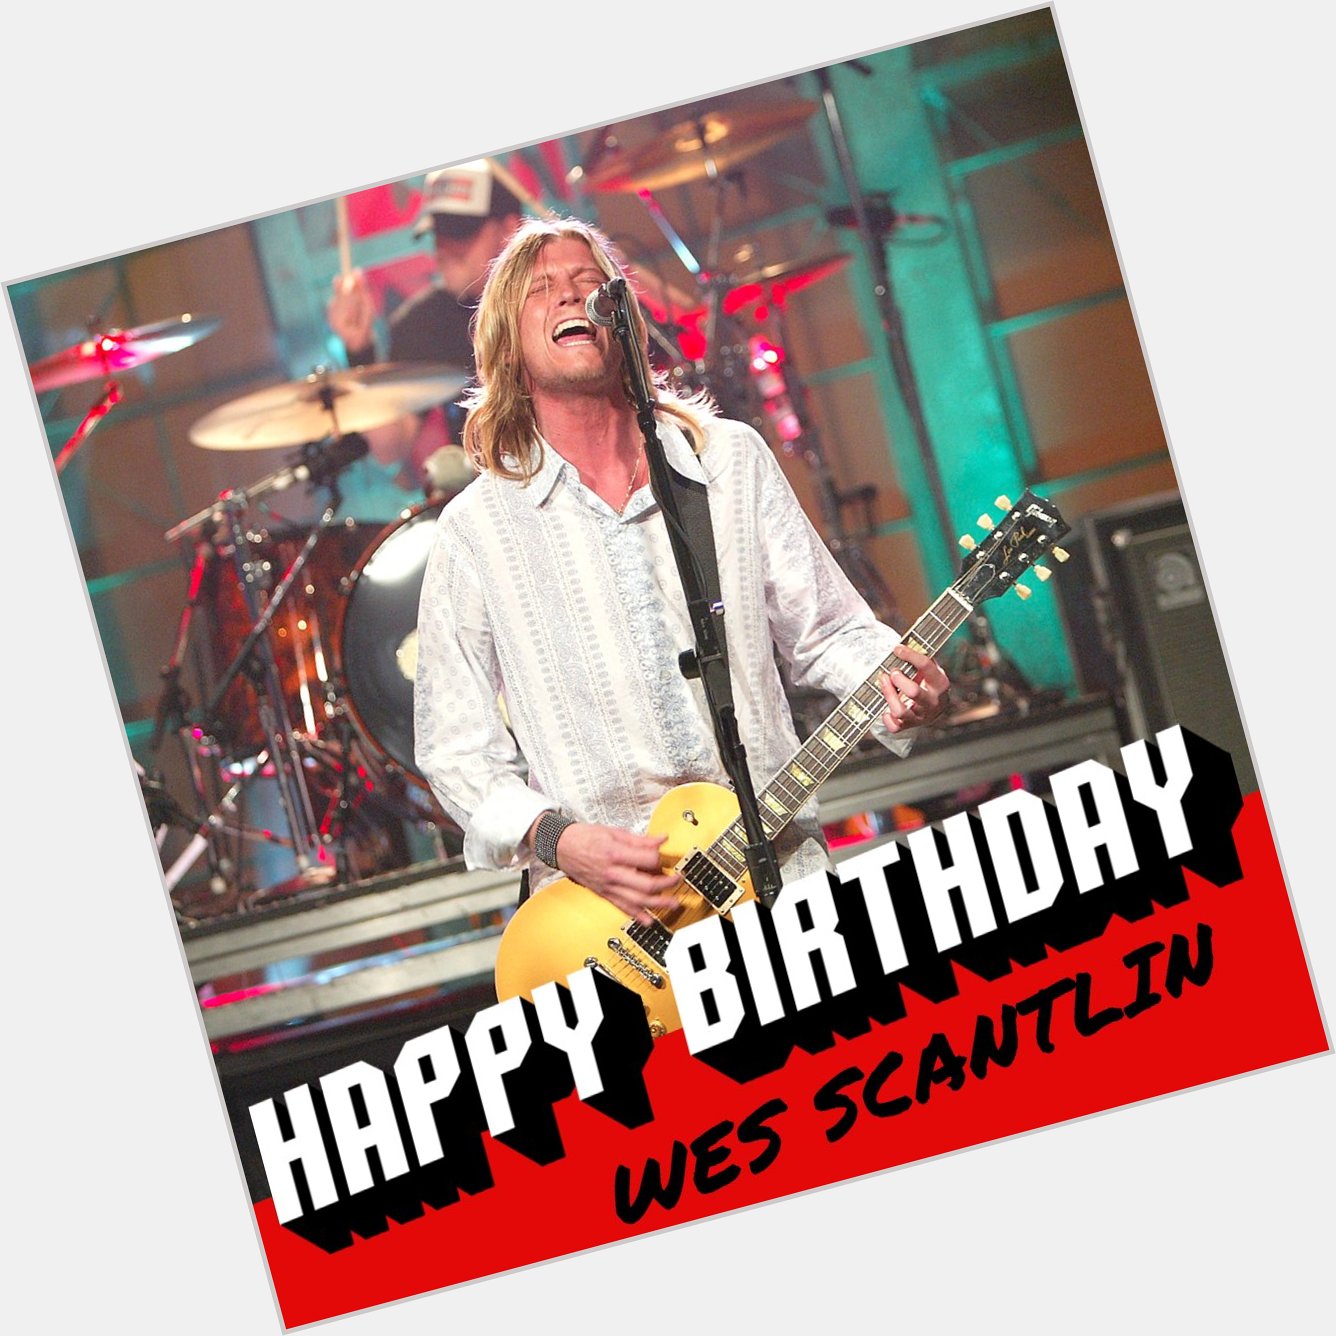 Happy 45th birthday to Wes Scantlin! 